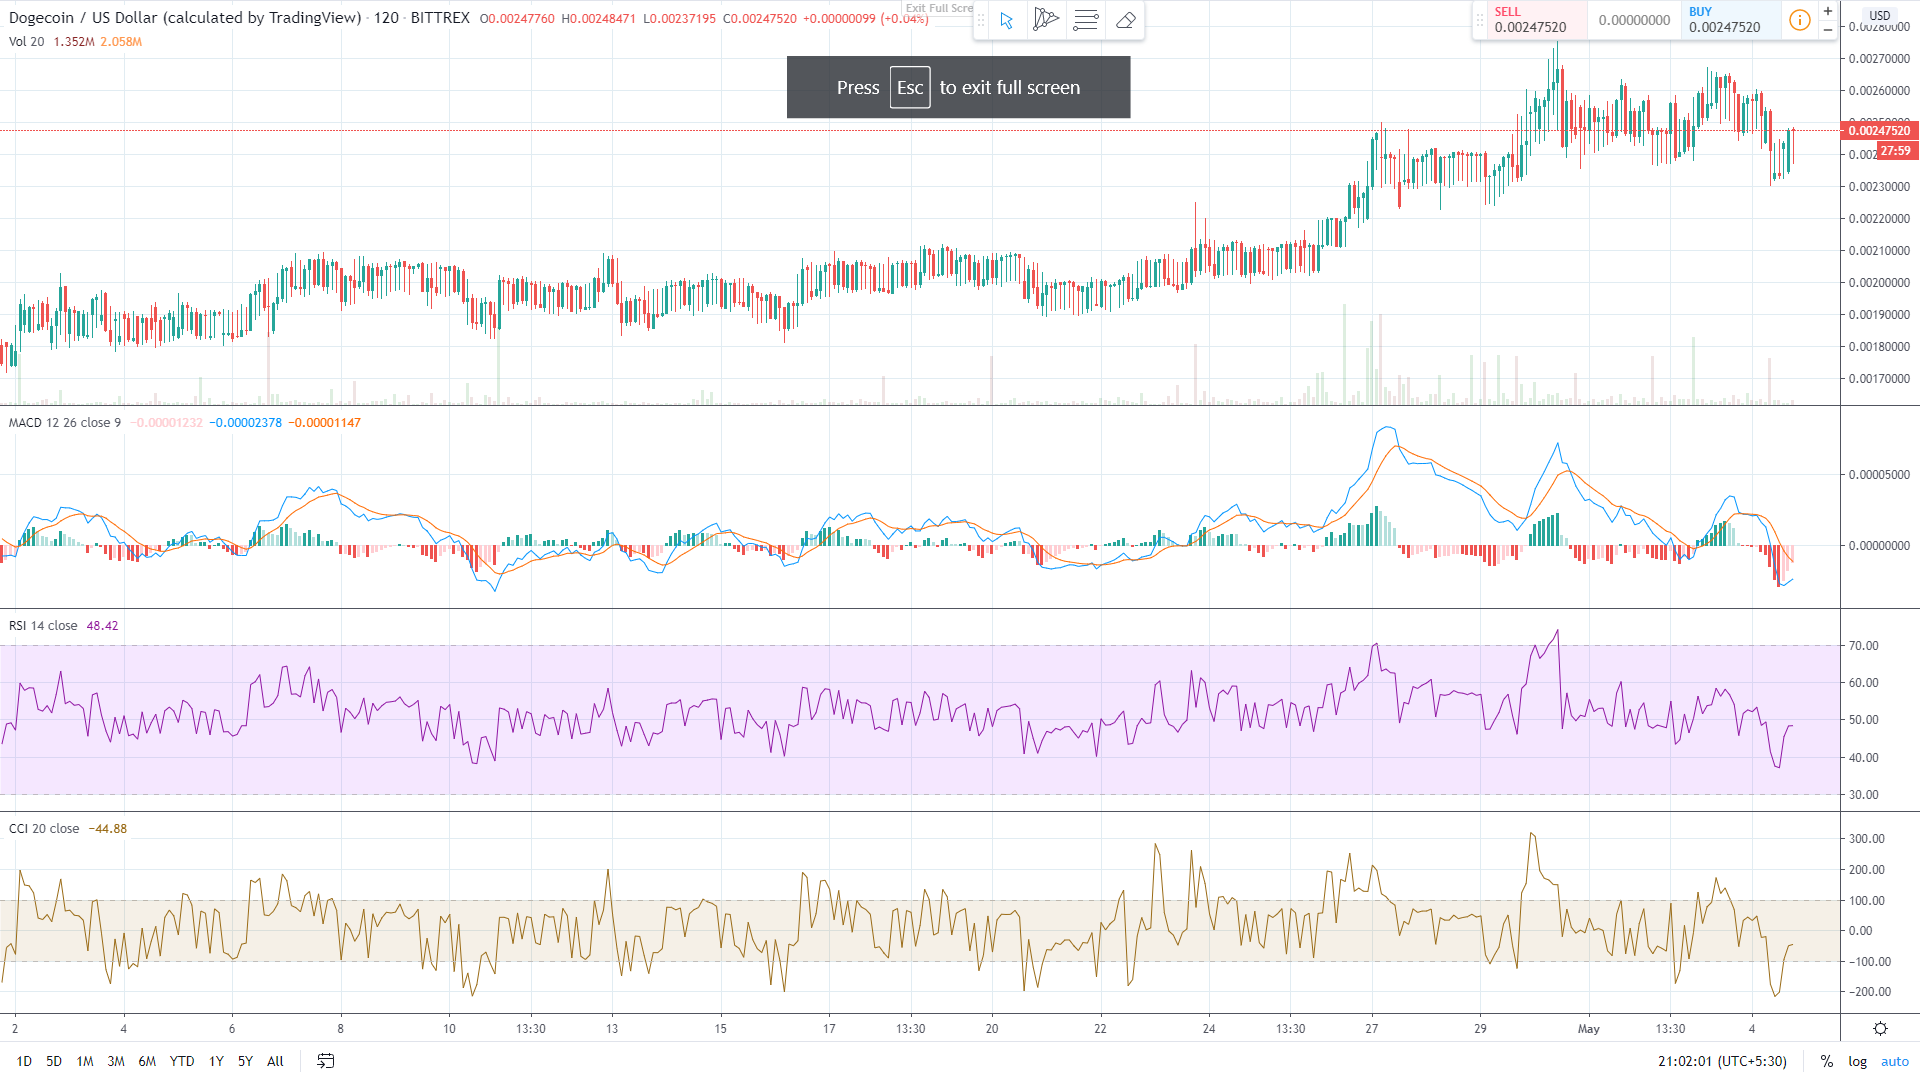 Dogecoin Price Chart. Dogecoin stock Price. Dogecoin Chart Live. Dogecoin Price today USD.